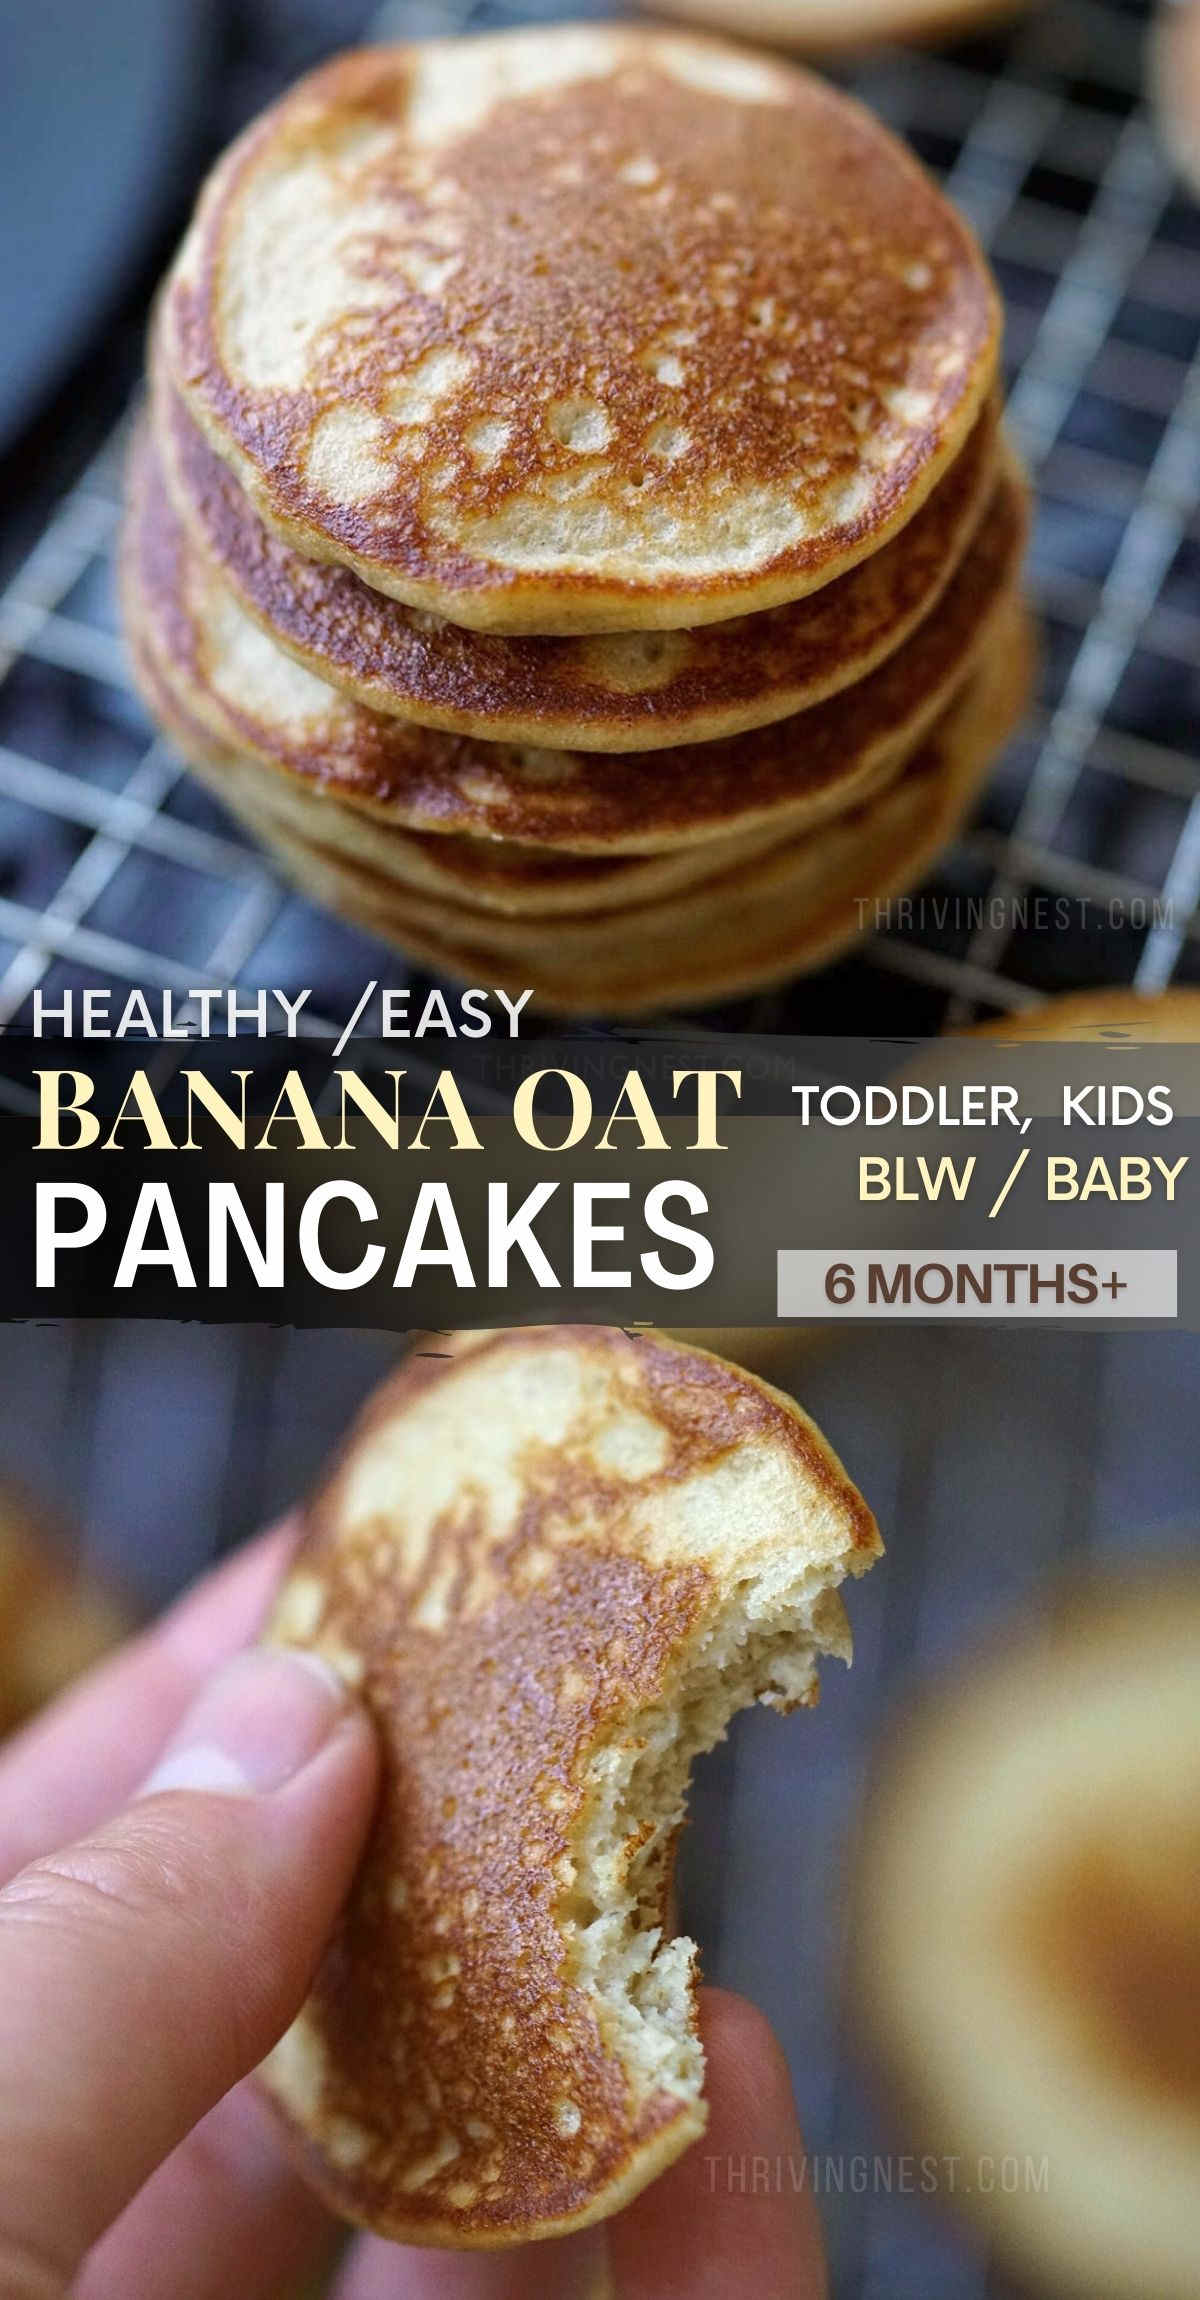 Soft banana oat pancakes perfect for your little ones. The oat banana pancakes have a light and tender texture which is suitable for babies starting baby led weaning (6 months+), also toddlers and older kids. It’s so simple and quick – make the batter for these oatmeal banana pancakes the night before and cook in the morning. #banana #pancakes #oat #oatmeal #baby #toddler #blw